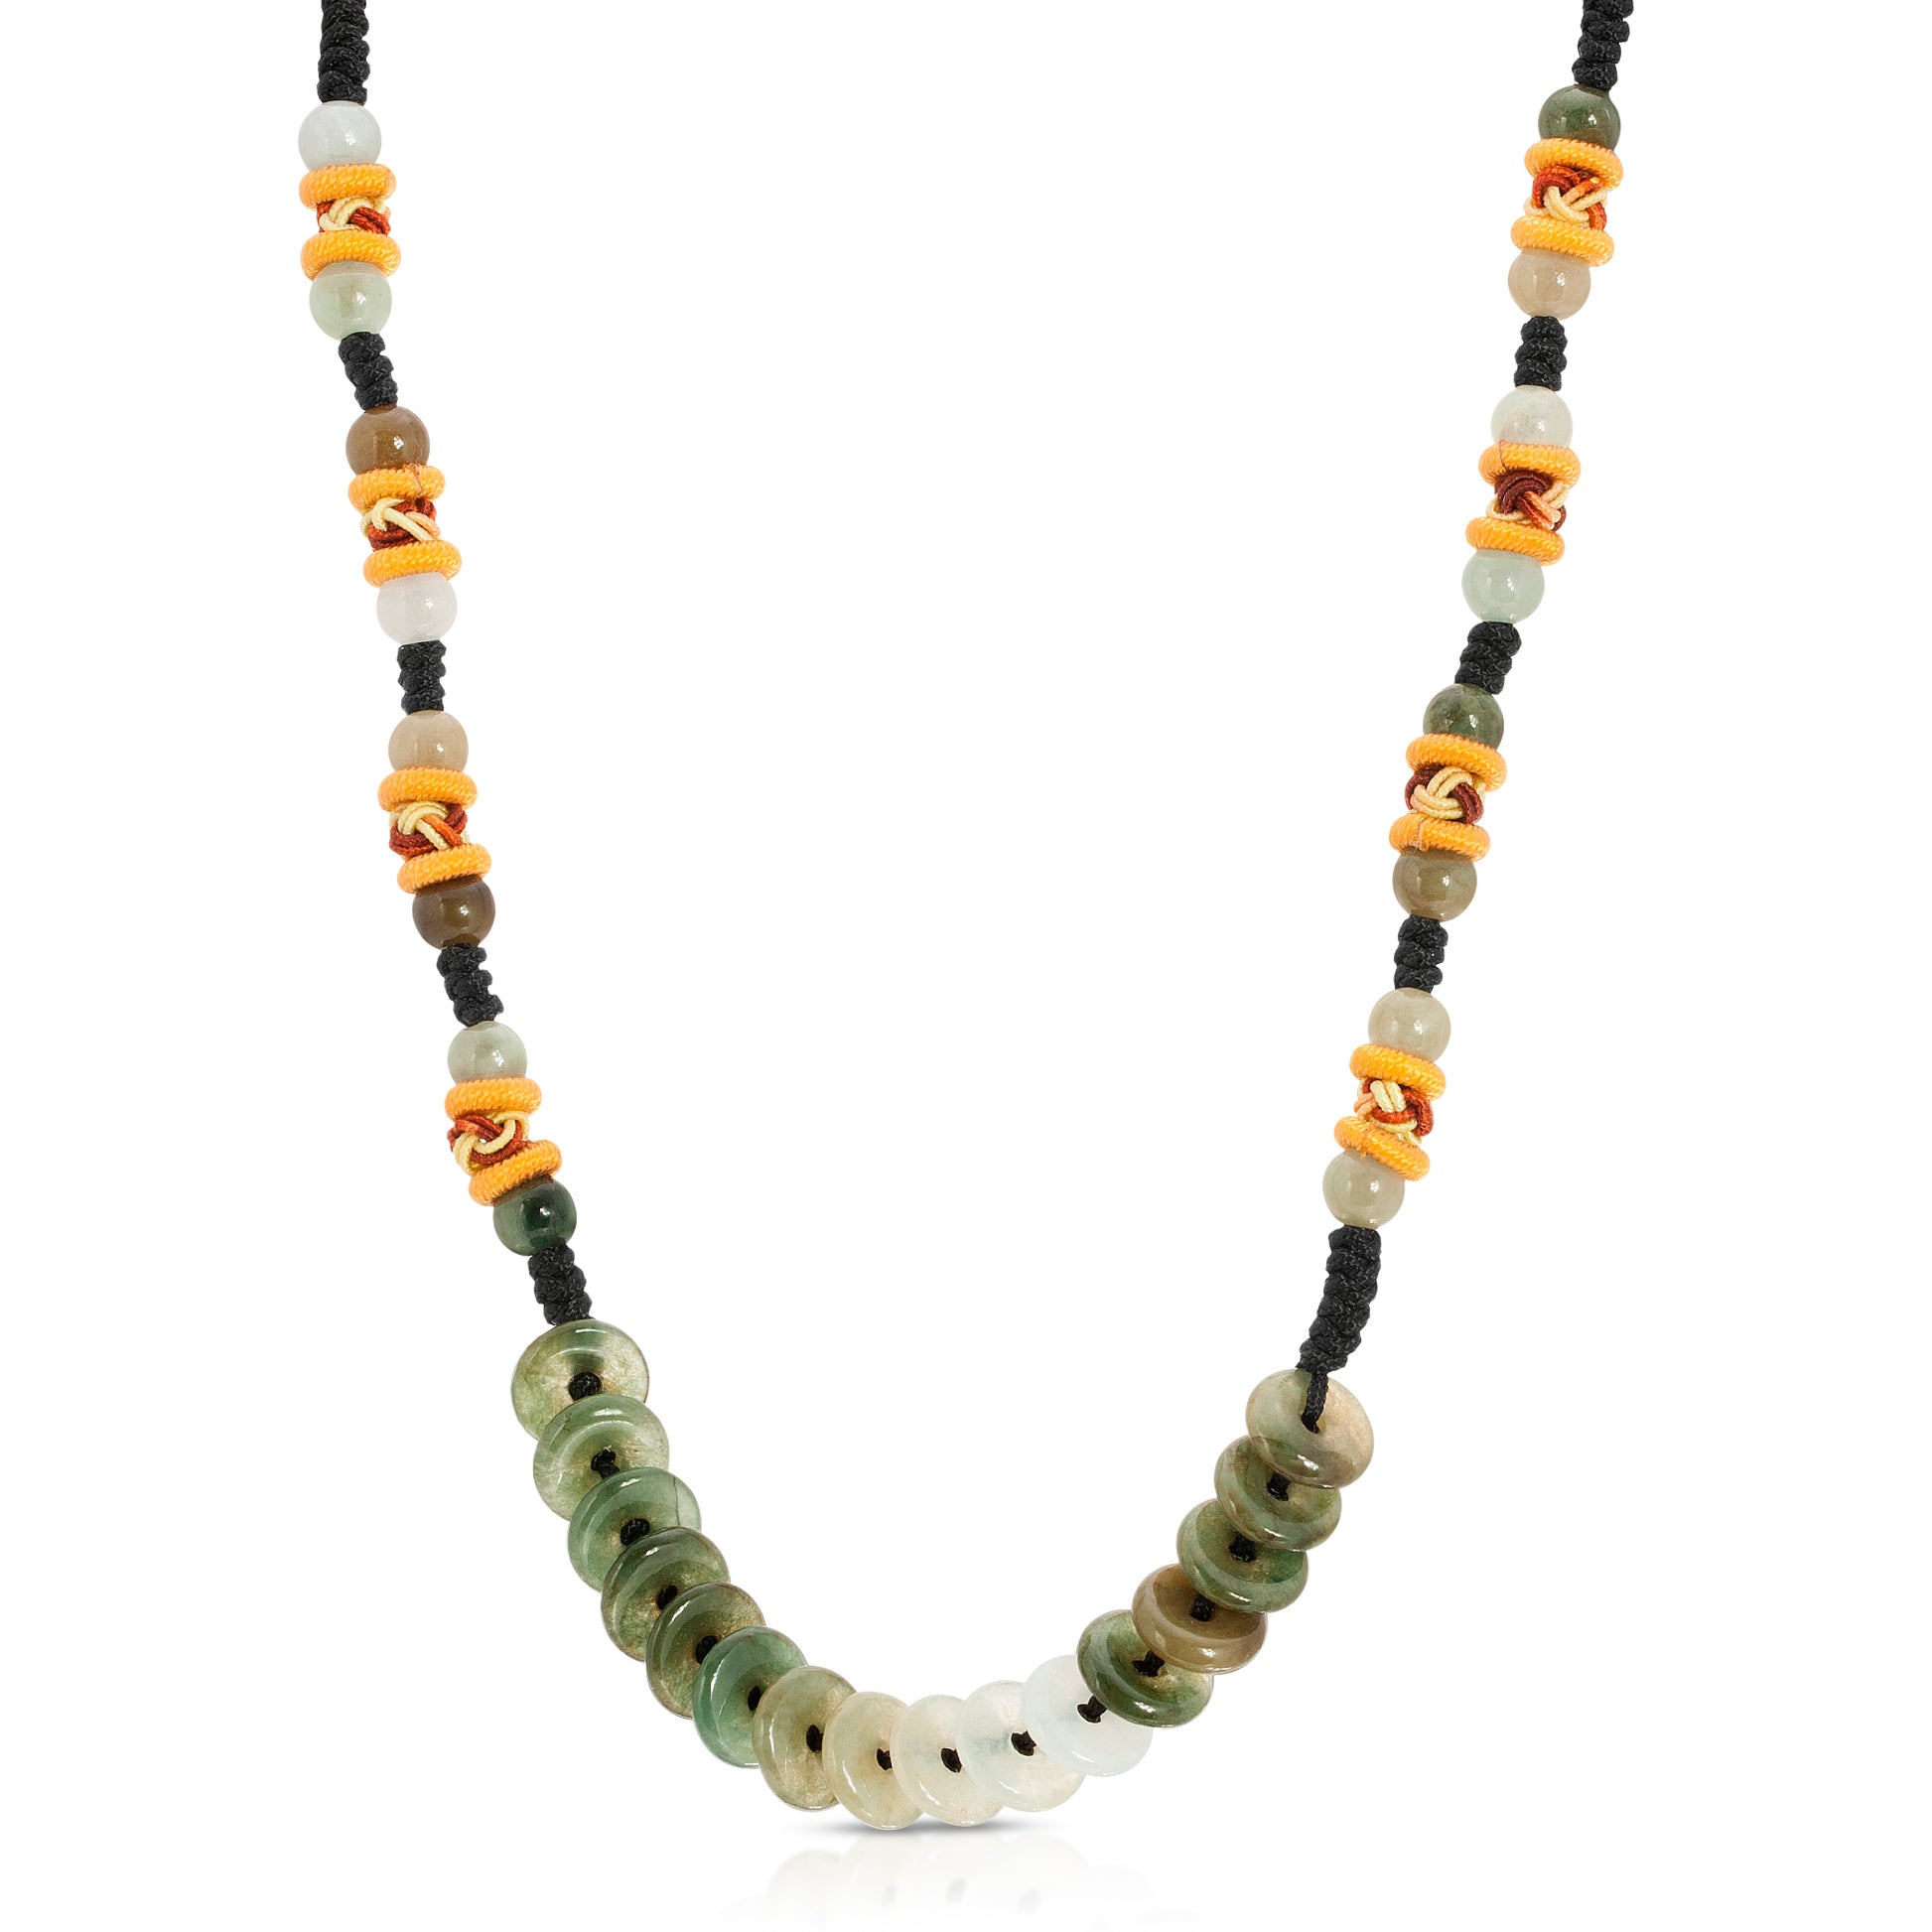 Represent the Endless Cycles of Life with PI Jade Necklace made with Black Cord